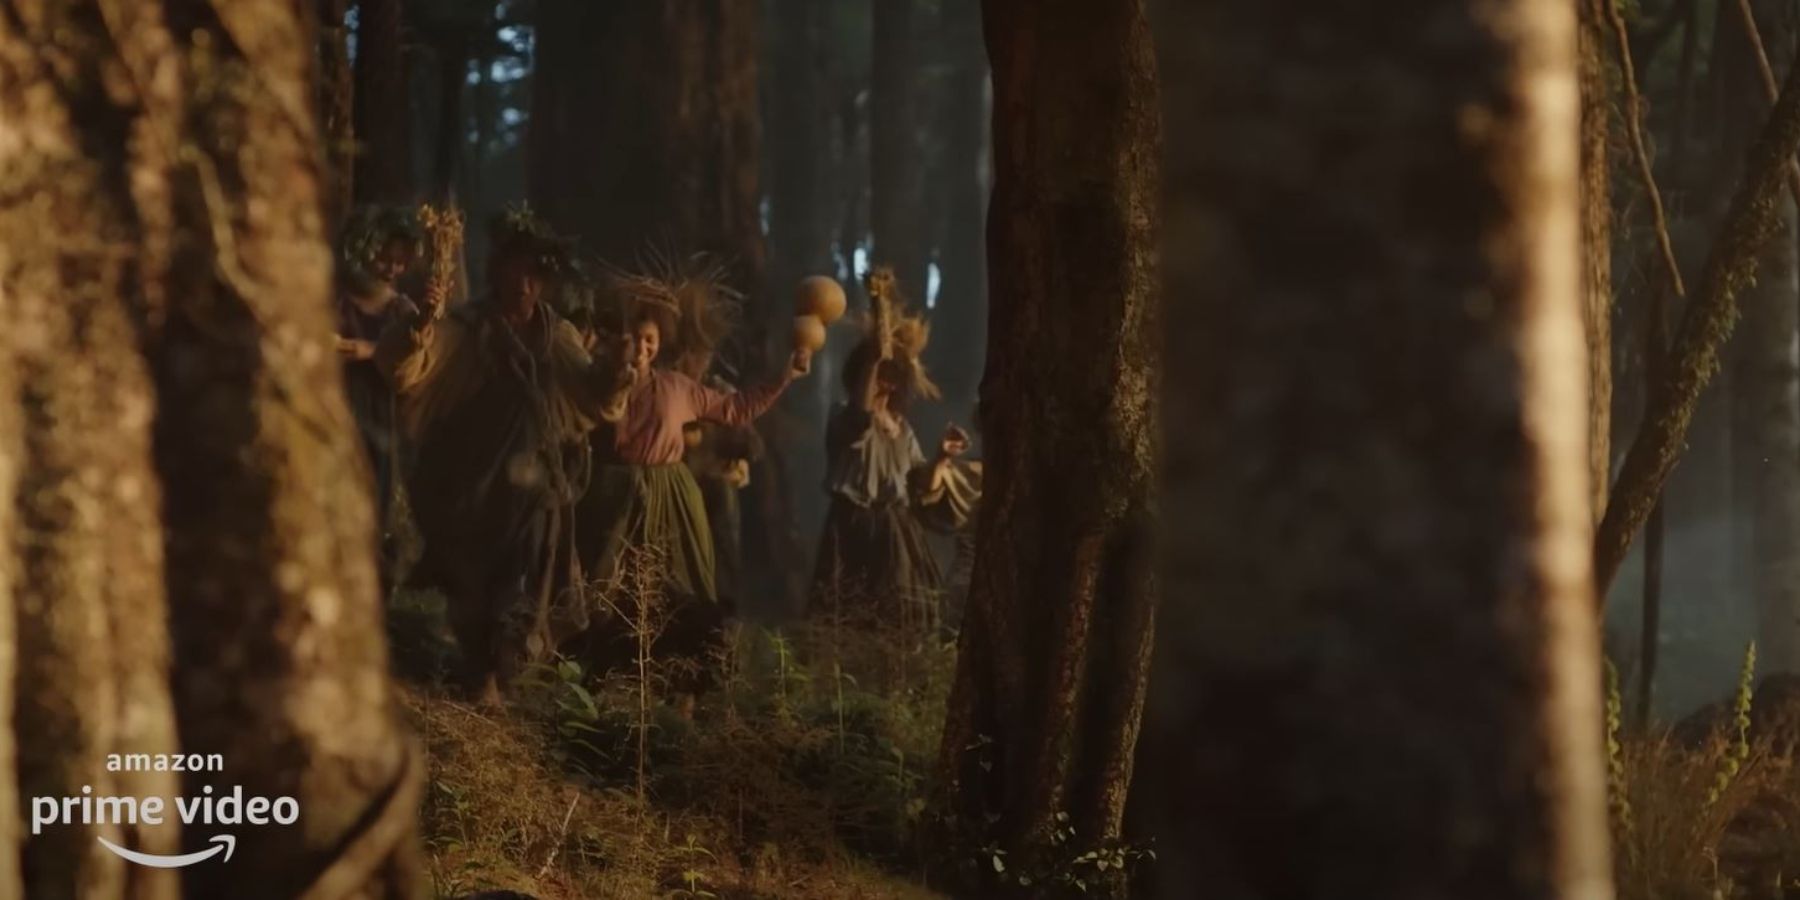 Harfoots dancing in the woods